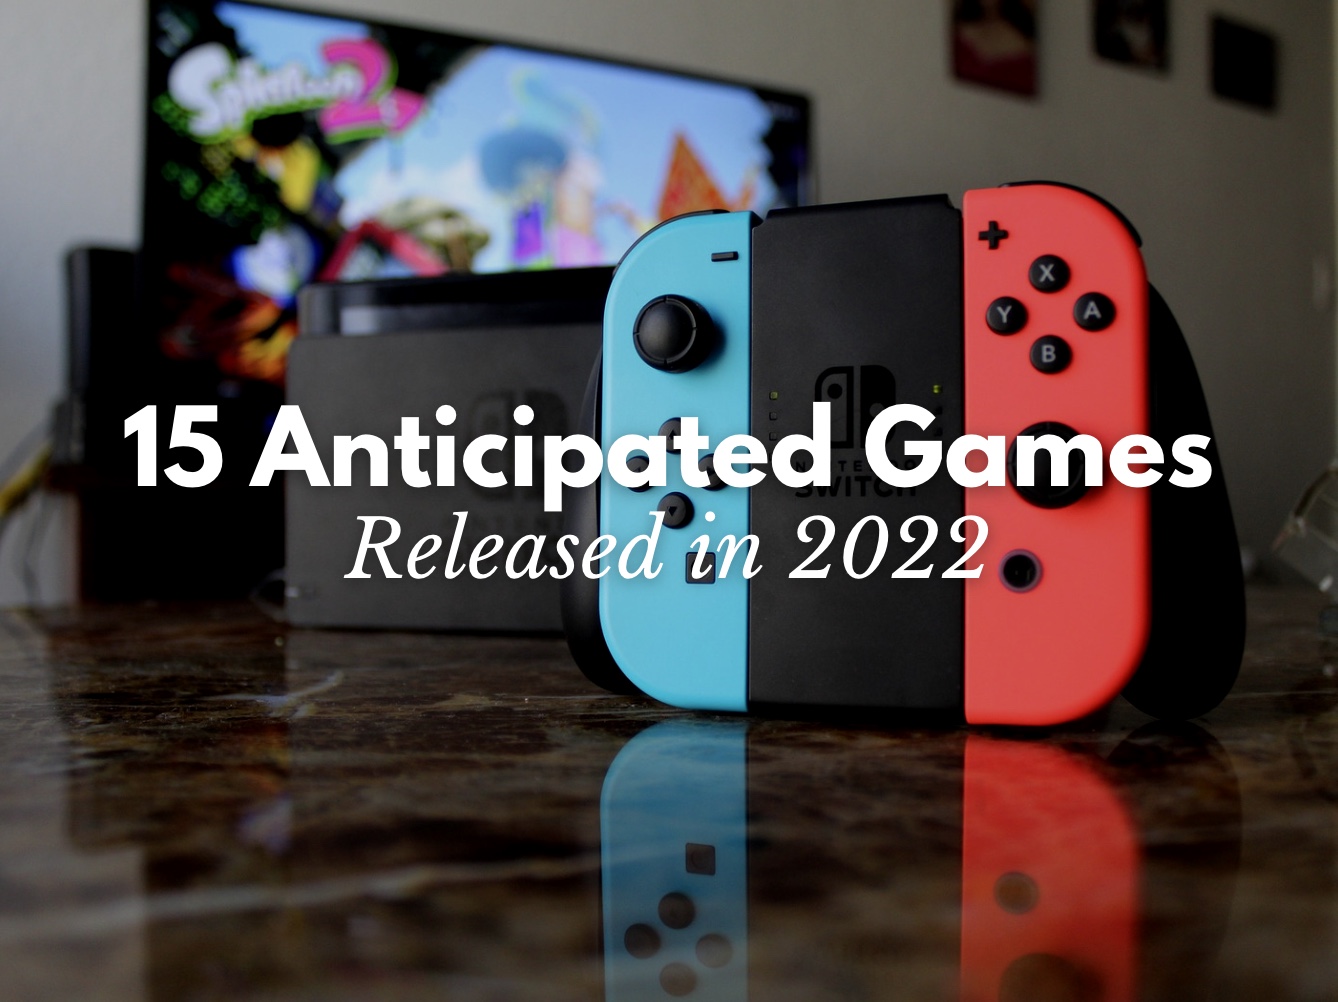 15 Anticipated Games Released in Japan 2022